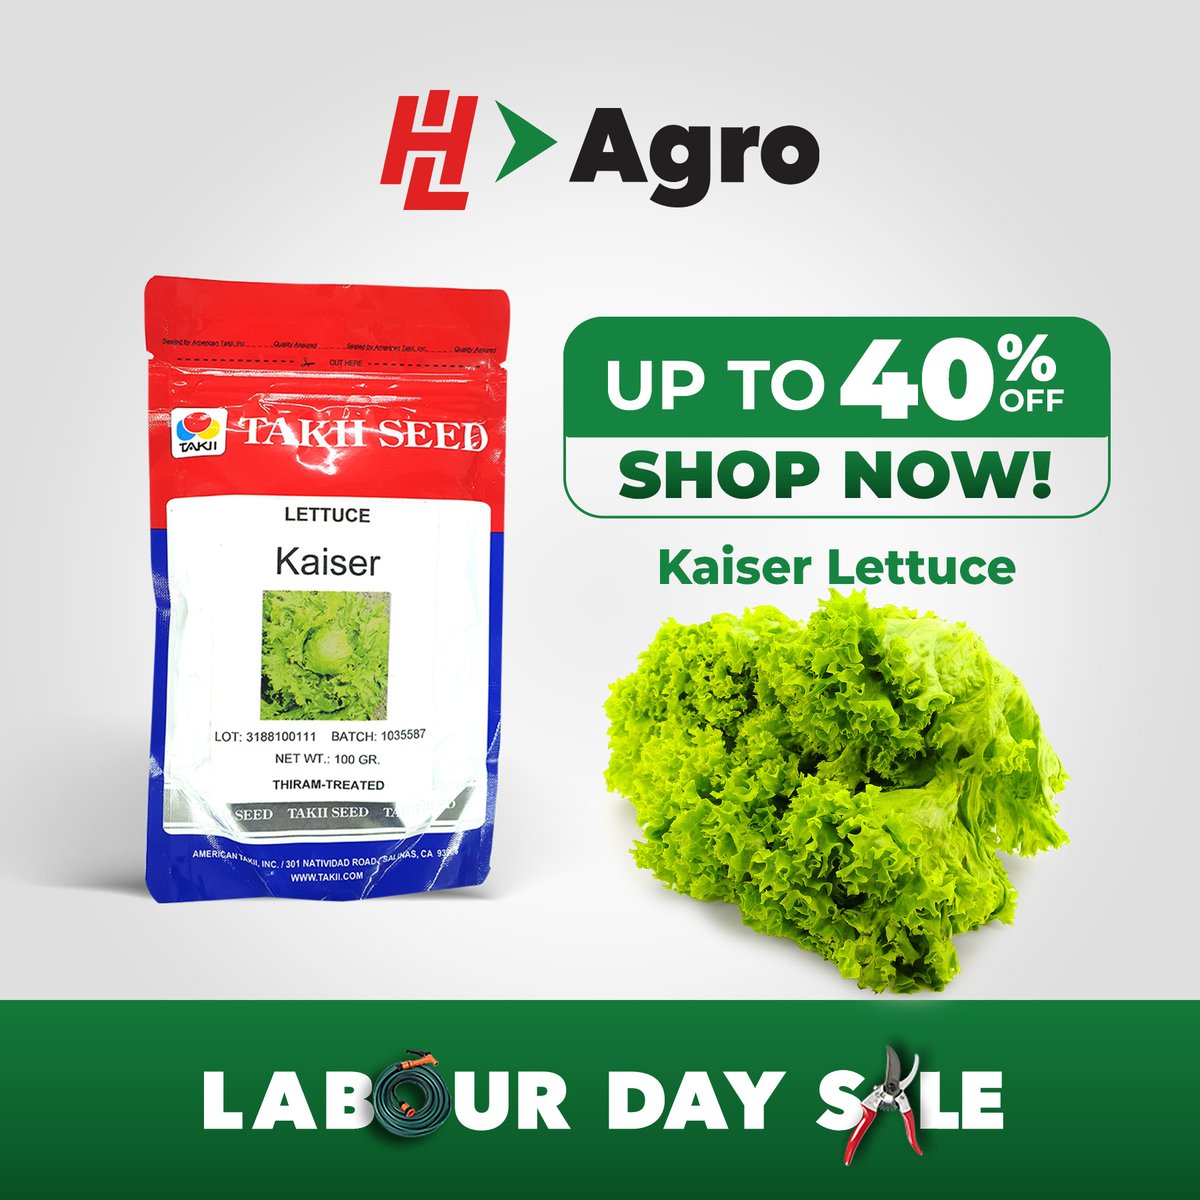 Yes, it’s true! Our Labour Day Sale is still going strong with seeds up to 40% off. Shop at our stores and grab a pack or two today! #HLAgro #LabourDay #SweetDeals #ShopNow